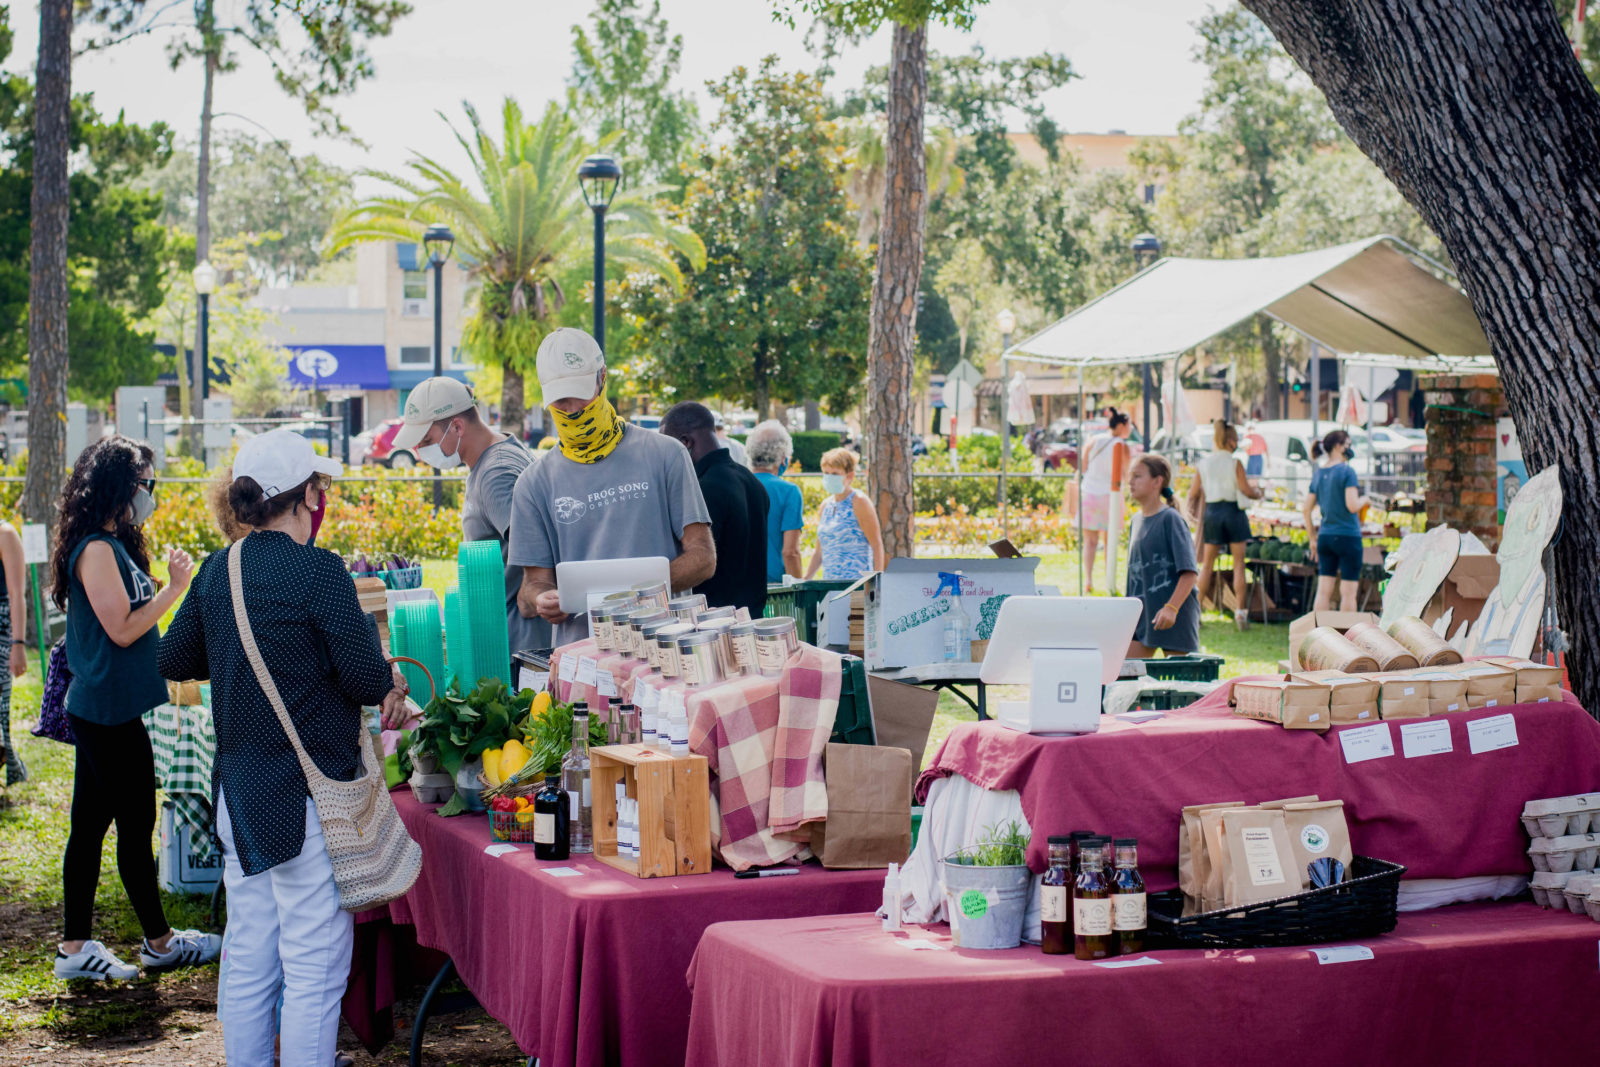 People gather at the Frog Song Organics stand at the Winter Park Farmer's Market.